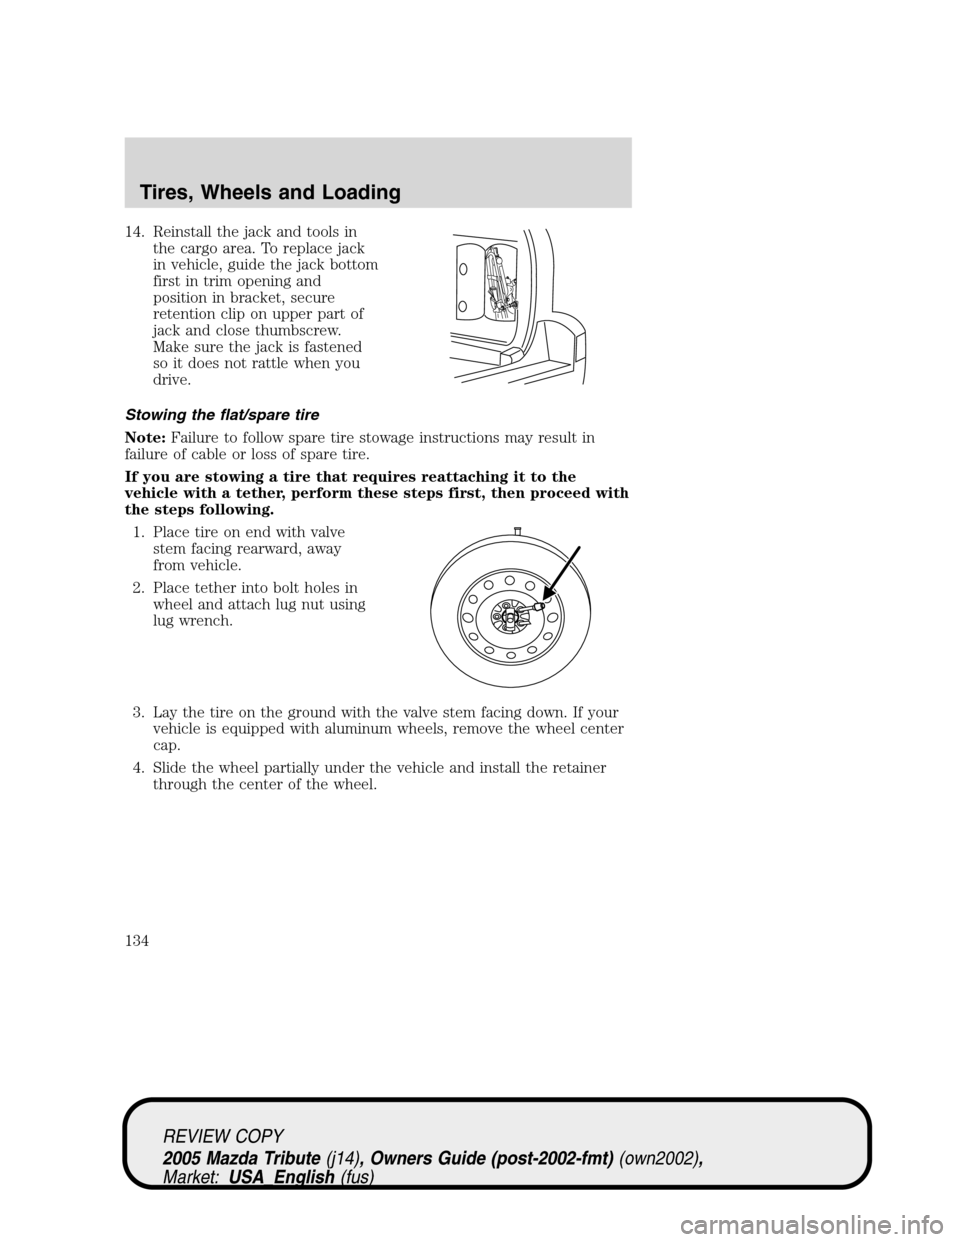 MAZDA MODEL TRIBUTE 2005  Owners Manual (in English) 14. Reinstall the jack and tools in
the cargo area. To replace jack
in vehicle, guide the jack bottom
first in trim opening and
position in bracket, secure
retention clip on upper part of
jack and clo